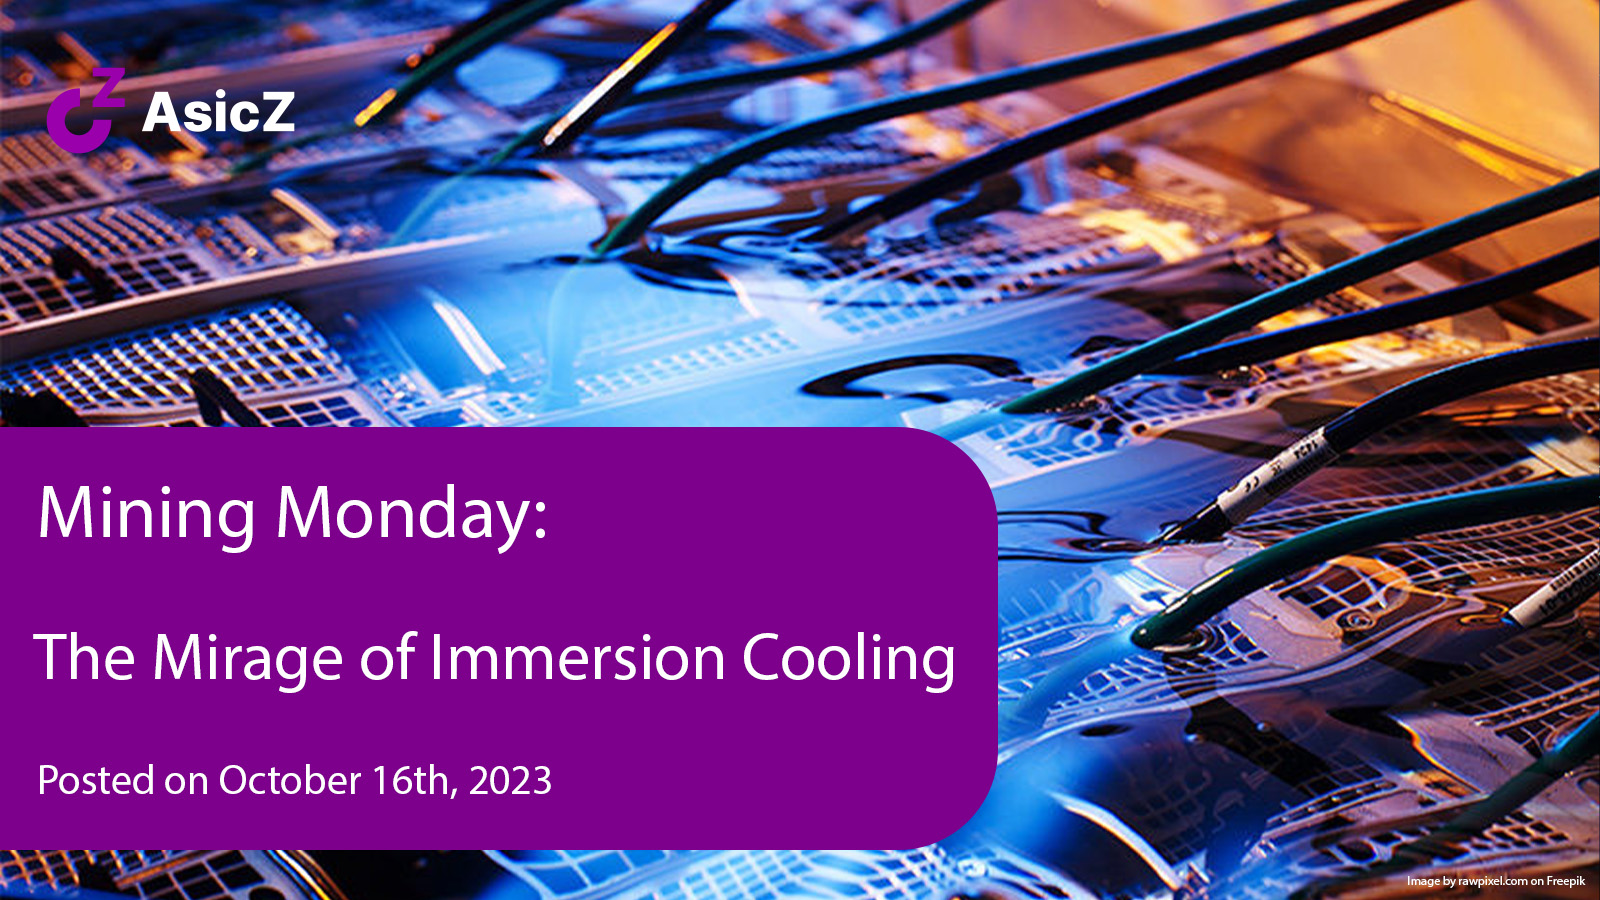 Mining Monday: The Mirage of Immersion Cooling